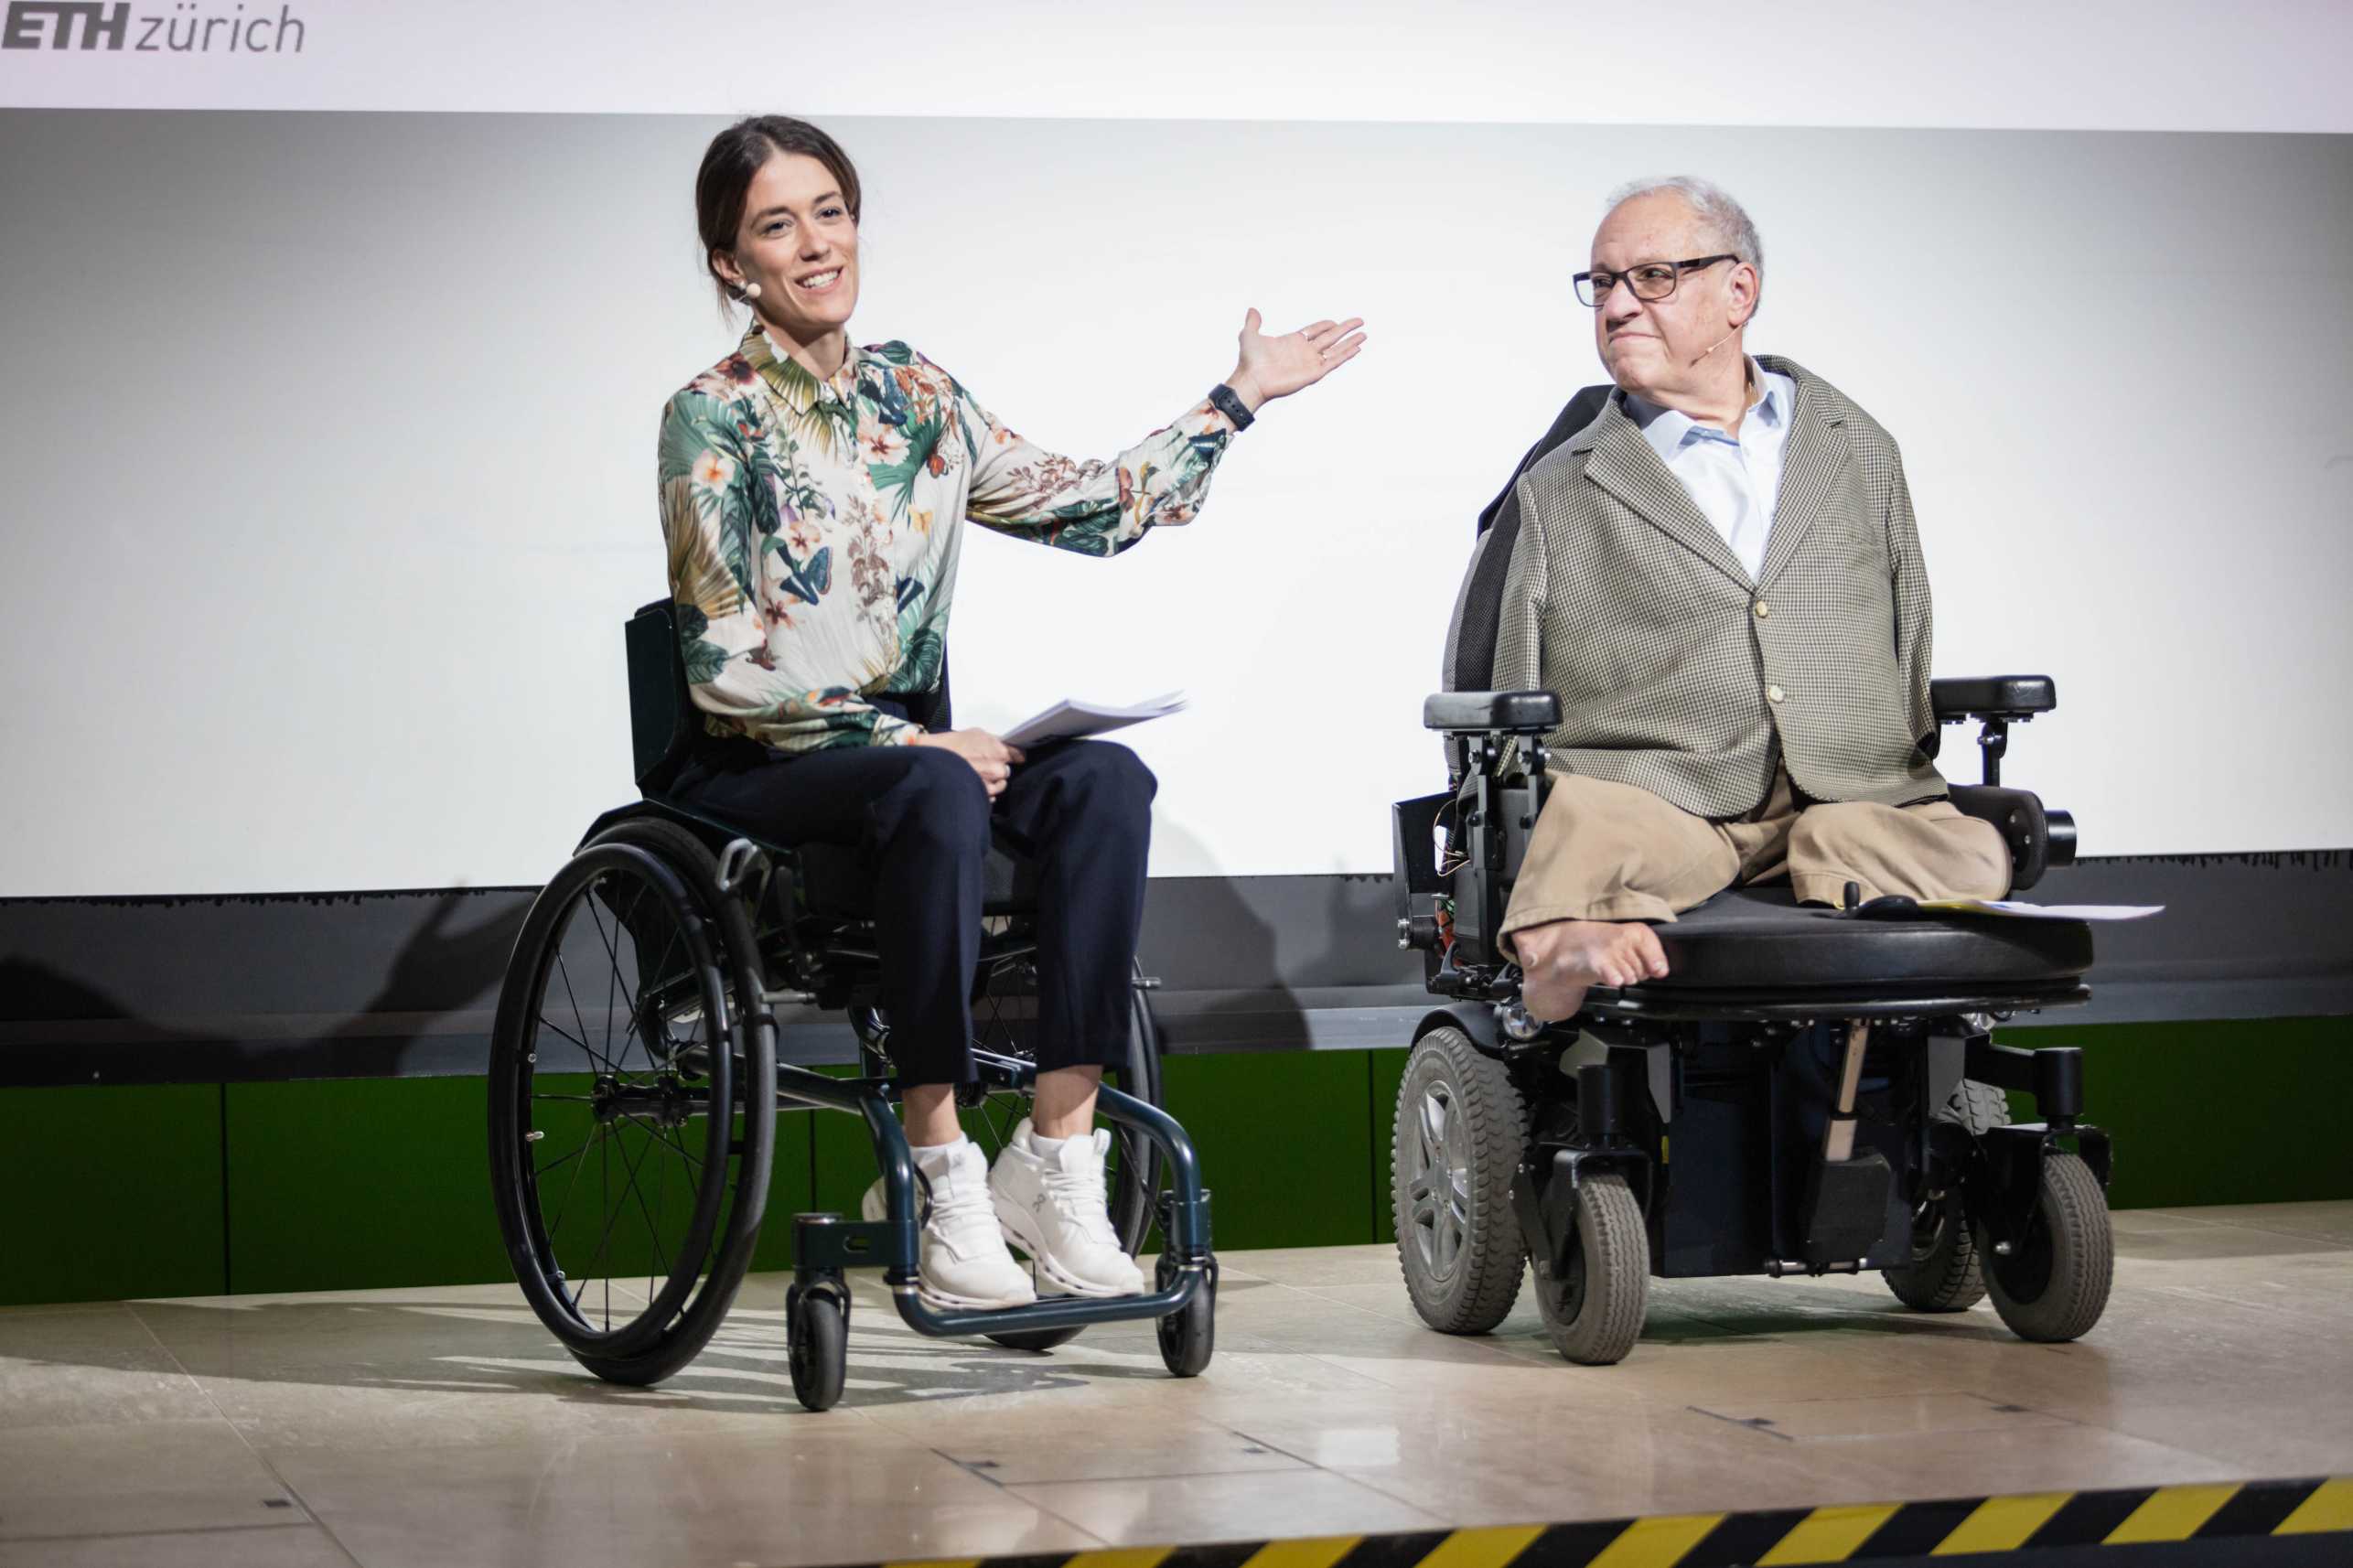 Enlarged view:  Rubina Meixgerand Christian Lohr on stage. Both are sitting in wheelchairs